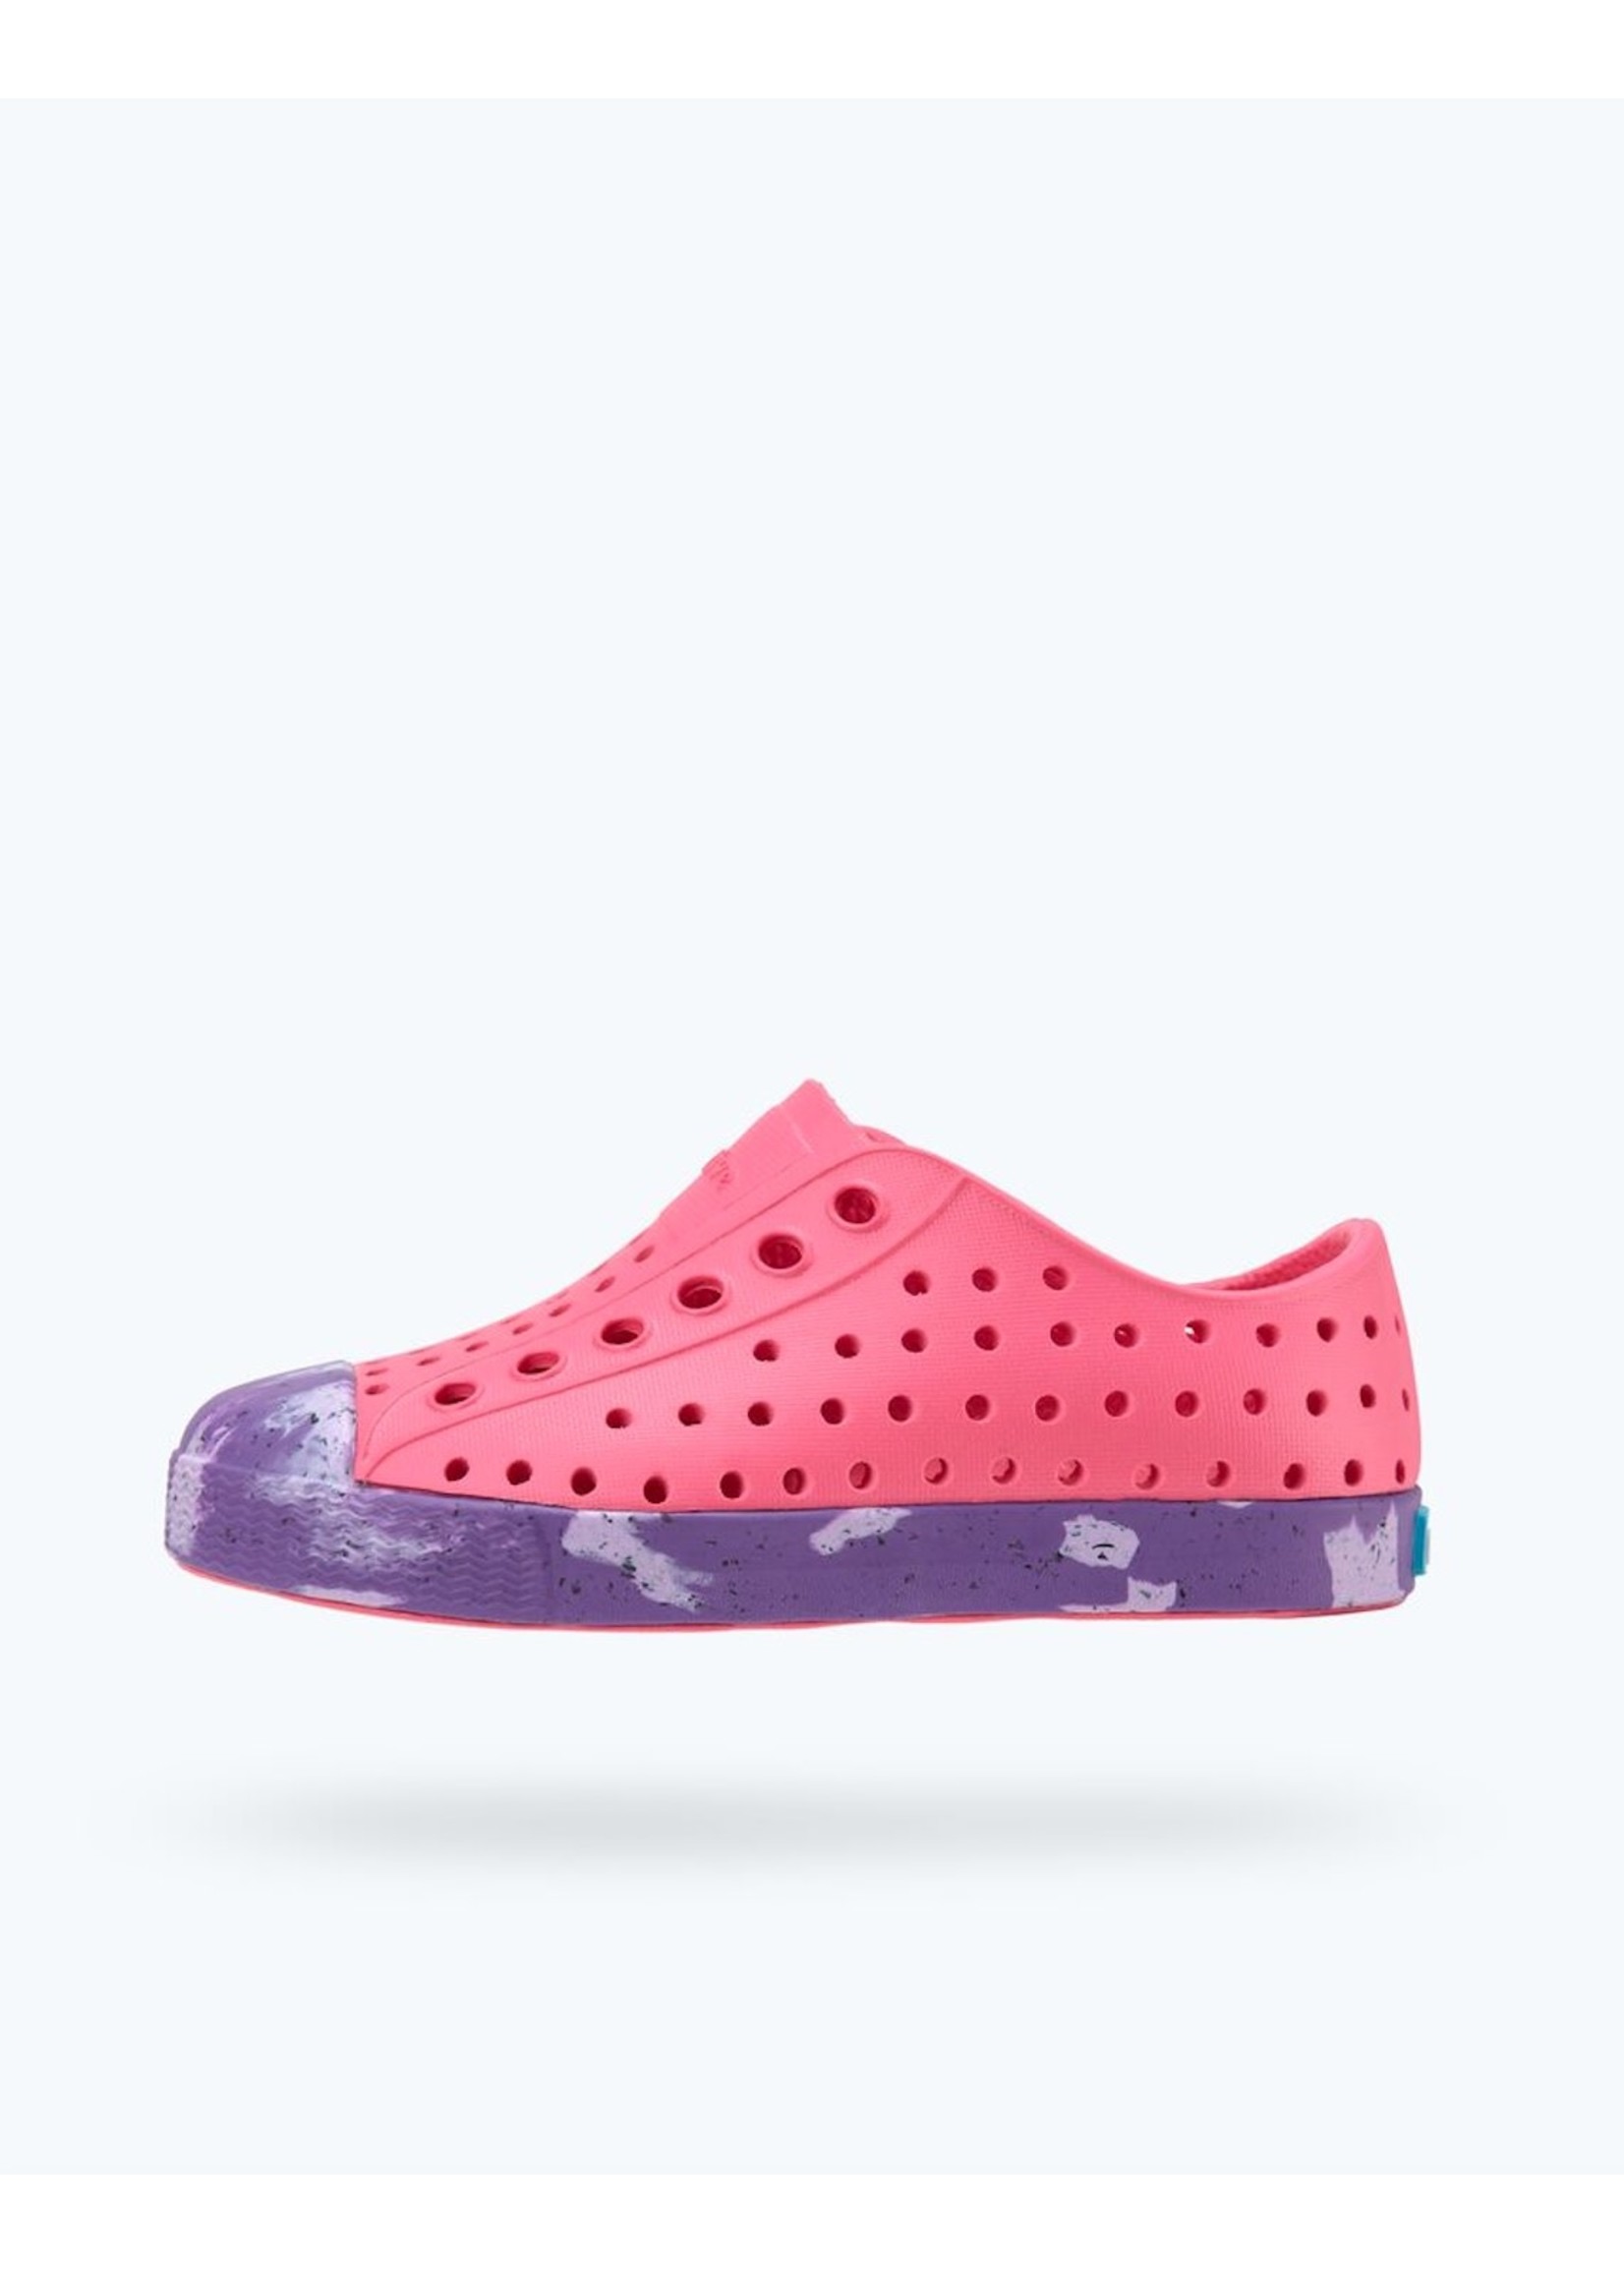 Native Shoes Native Shoes Jefferson Marbled Child in Hollywood Pink/ Starfish Lavender Marble